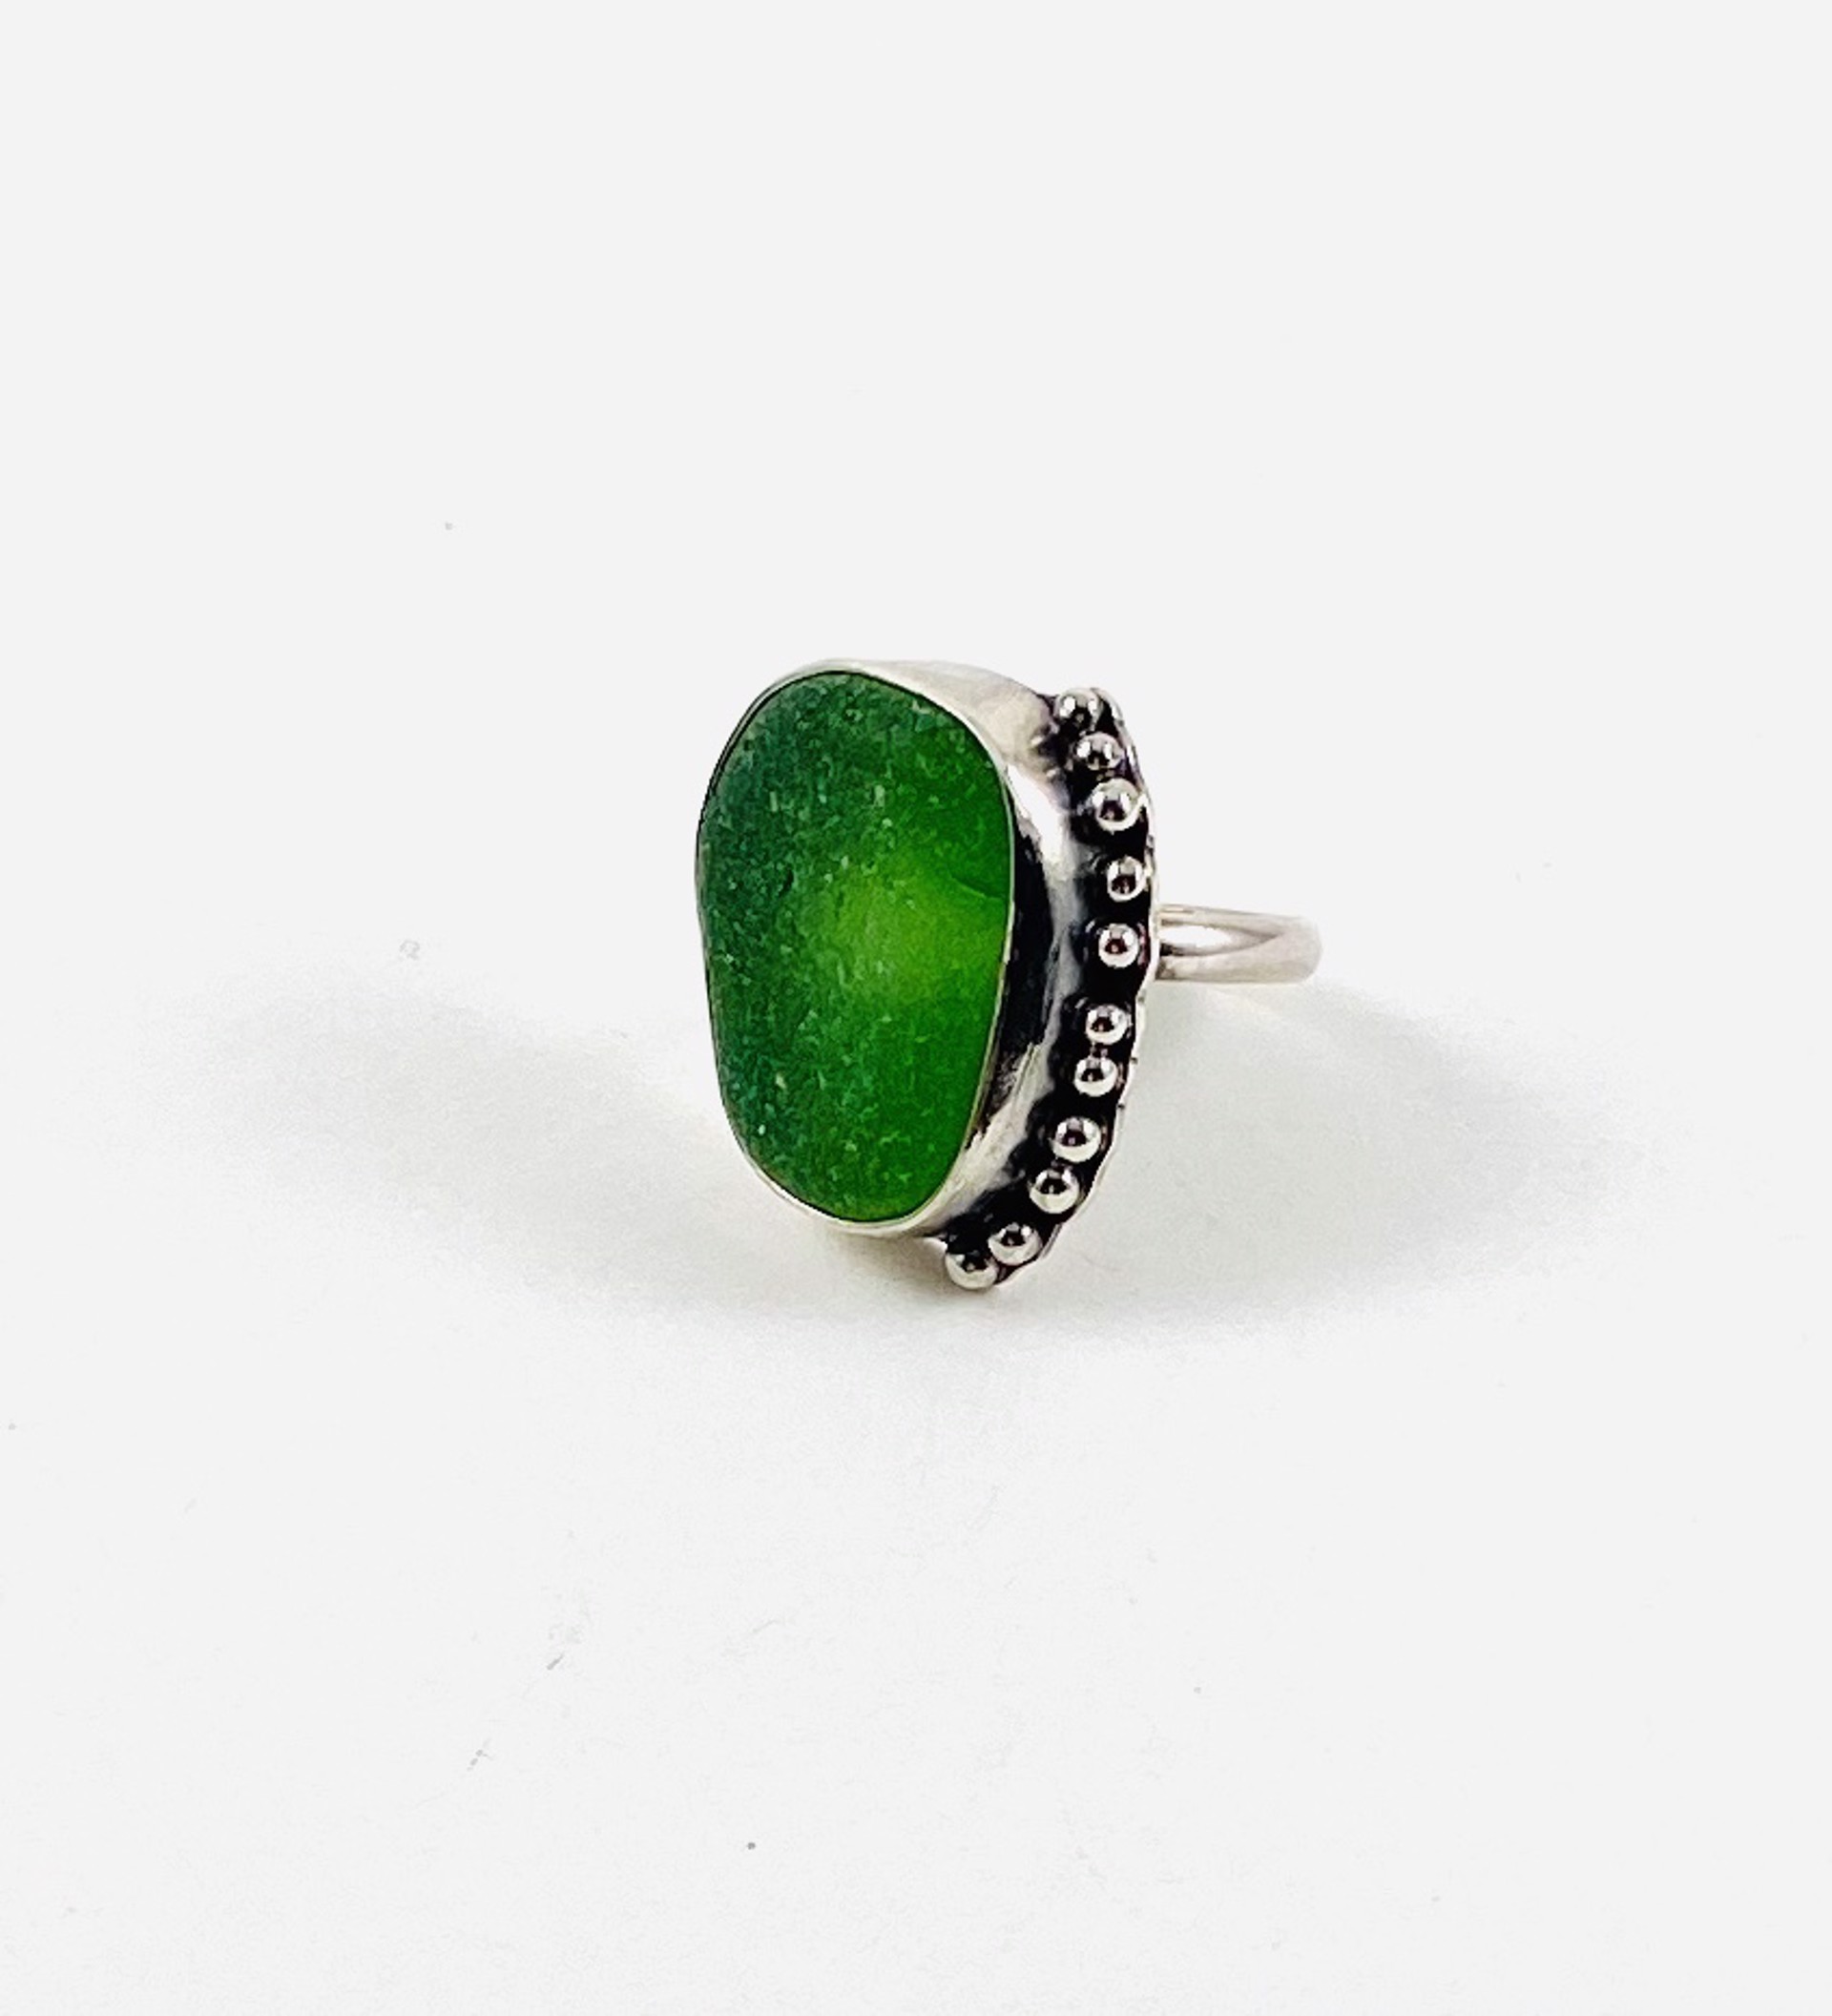 AB20-9 Green Sea Glass Silver Ring, sz 6 by Anne Bivens